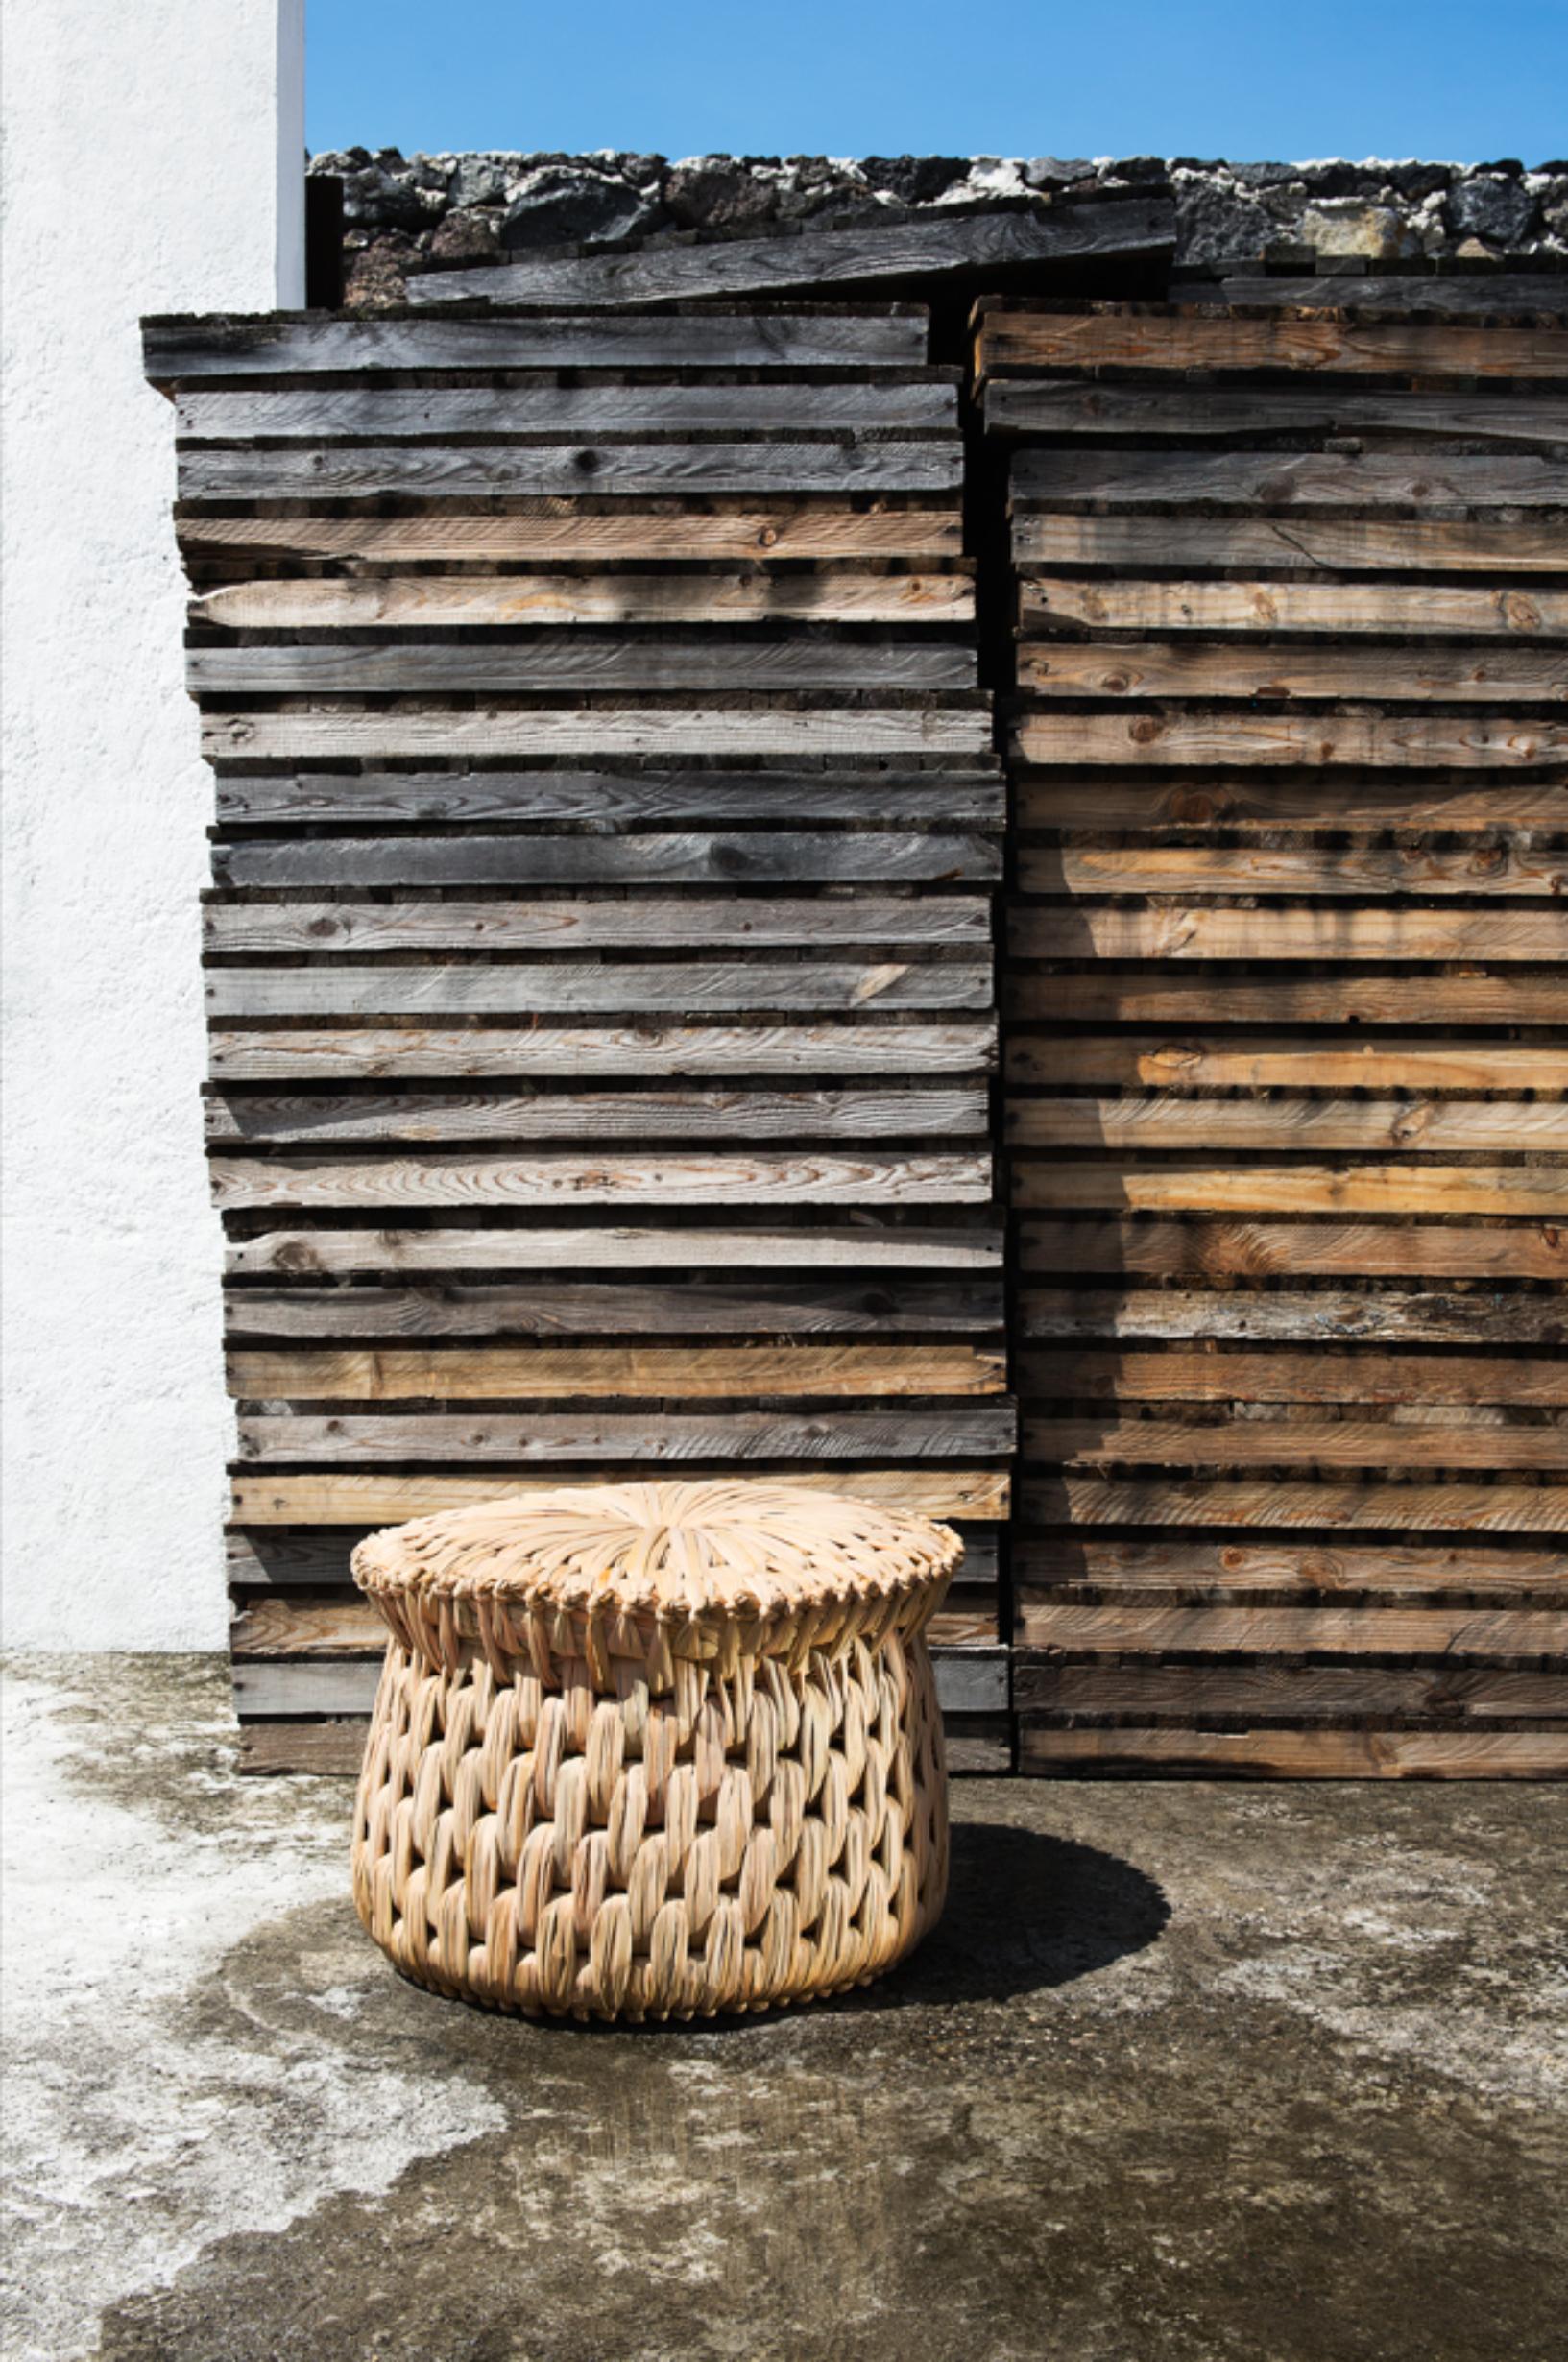 Txt.02 stool by Txt. Ure
Dimensions: Ø 64 x H 40 cm. 
Materials: Tulle natural fiber with natural finish.

For interior and exterior use (under covered spaces).

Txt. ure was the first design project to reintroduce the Mexican weaving style of